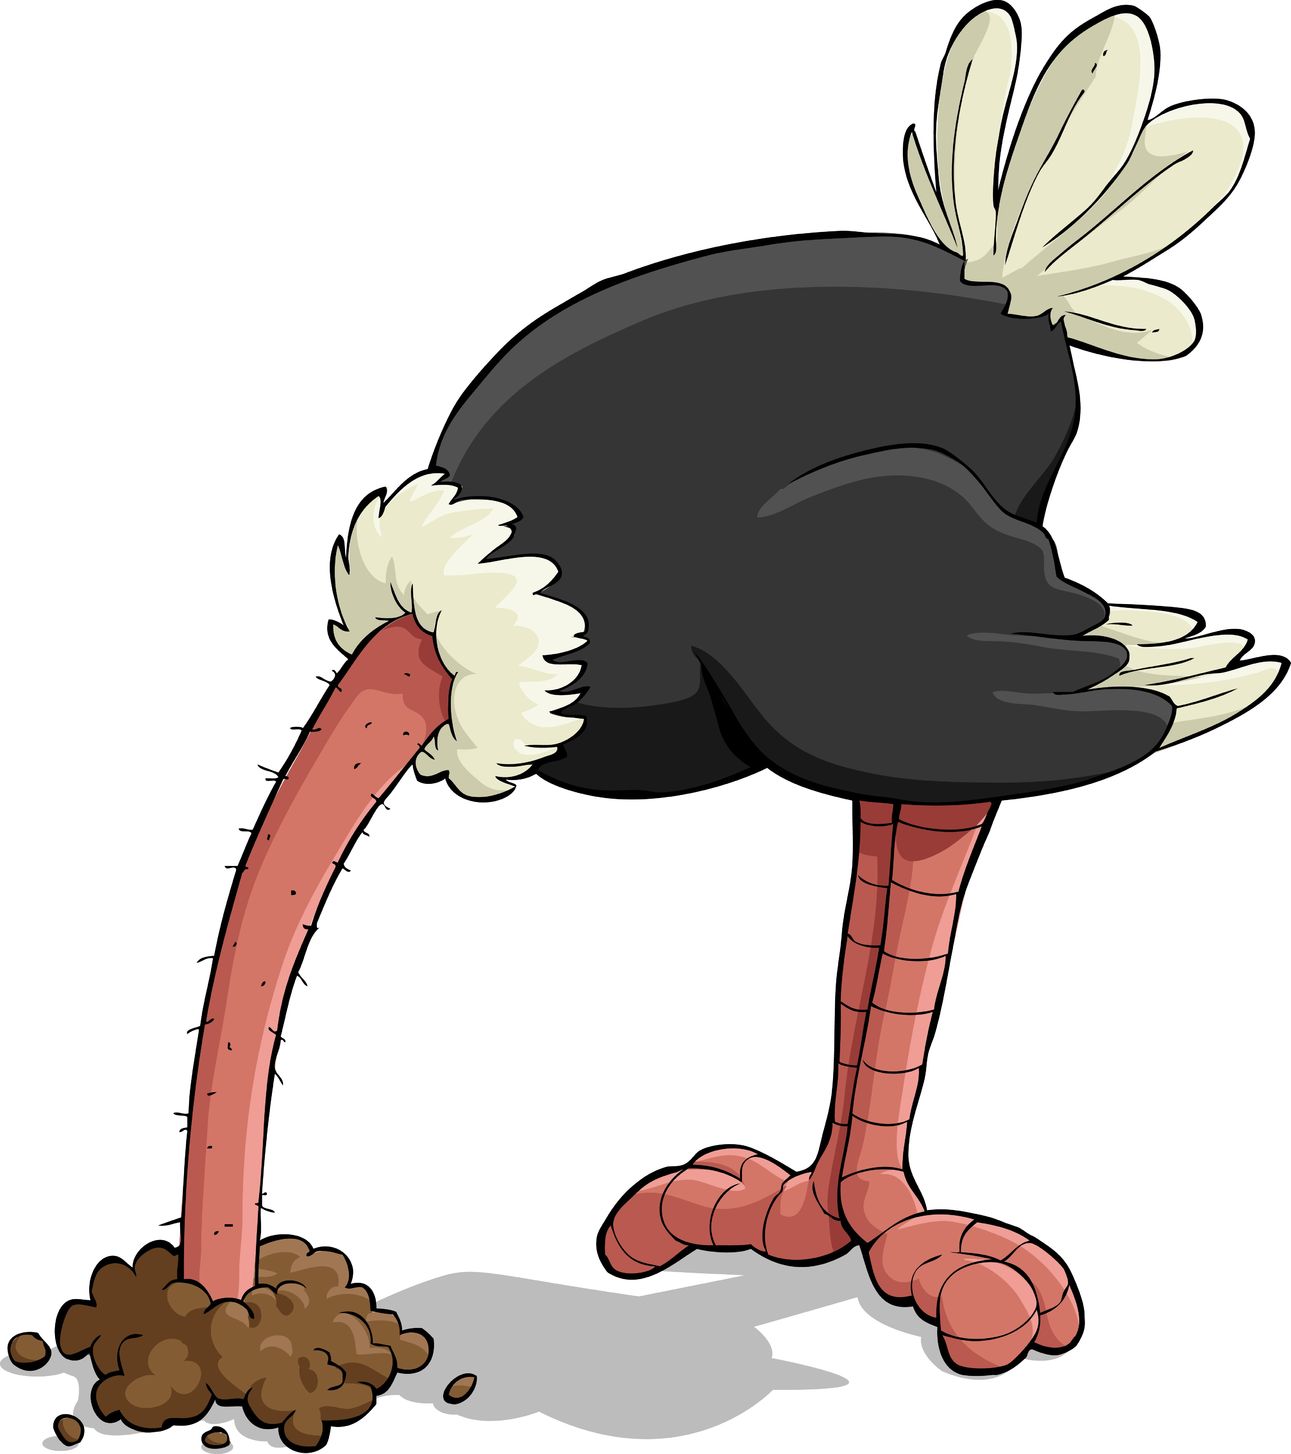 http://sustainablejill.com/wp-content/uploads/2013/09/Ostrich-with-head-in-sand-illustration.jpg